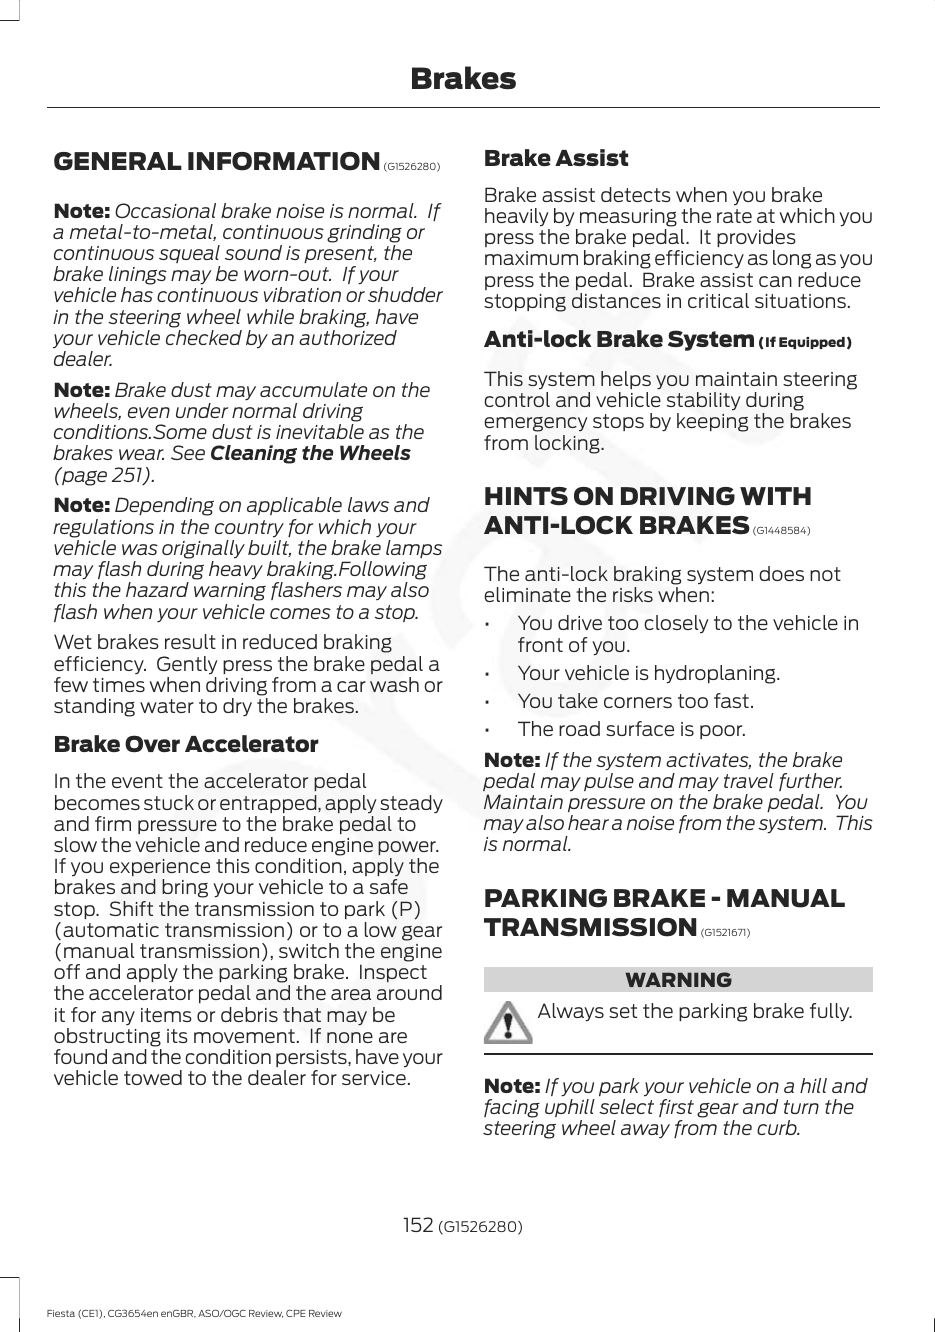 GENERAL INFORMATION (G1526280)Note: Occasional brake noise is normal.  Ifa metal-to-metal, continuous grinding orcontinuous squeal sound is present, thebrake linings may be worn-out.  If yourvehicle has continuous vibration or shudderin the steering wheel while braking, haveyour vehicle checked by an authorizeddealer.Note: Brake dust may accumulate on thewheels, even under normal drivingconditions.Some dust is inevitable as thebrakes wear. See Cleaning the Wheels(page 251).Note: Depending on applicable laws andregulations in the country for which yourvehicle was originally built, the brake lampsmay flash during heavy braking.Followingthis the hazard warning flashers may alsoflash when your vehicle comes to a stop.Wet brakes result in reduced brakingefficiency.  Gently press the brake pedal afew times when driving from a car wash orstanding water to dry the brakes.Brake Over AcceleratorIn the event the accelerator pedalbecomes stuck or entrapped, apply steadyand firm pressure to the brake pedal toslow the vehicle and reduce engine power.If you experience this condition, apply thebrakes and bring your vehicle to a safestop.  Shift the transmission to park (P)(automatic transmission) or to a low gear(manual transmission), switch the engineoff and apply the parking brake.  Inspectthe accelerator pedal and the area aroundit for any items or debris that may beobstructing its movement.  If none arefound and the condition persists, have yourvehicle towed to the dealer for service.Brake AssistBrake assist detects when you brakeheavily by measuring the rate at which youpress the brake pedal.  It providesmaximum braking efficiency as long as youpress the pedal.  Brake assist can reducestopping distances in critical situations.Anti-lock Brake System (If Equipped)This system helps you maintain steeringcontrol and vehicle stability duringemergency stops by keeping the brakesfrom locking.HINTS ON DRIVING WITHANTI-LOCK BRAKES (G1448584)The anti-lock braking system does noteliminate the risks when:• You drive too closely to the vehicle infront of you.• Your vehicle is hydroplaning.• You take corners too fast.• The road surface is poor.Note: If the system activates, the brakepedal may pulse and may travel further.Maintain pressure on the brake pedal.  Youmay also hear a noise from the system.  Thisis normal.PARKING BRAKE - MANUALTRANSMISSION (G1521671)WARNINGAlways set the parking brake fully.Note: If you park your vehicle on a hill andfacing uphill select first gear and turn thesteering wheel away from the curb.152 (G1526280)Fiesta (CE1), CG3654en enGBR, ASO/OGC Review, CPE ReviewBrakes